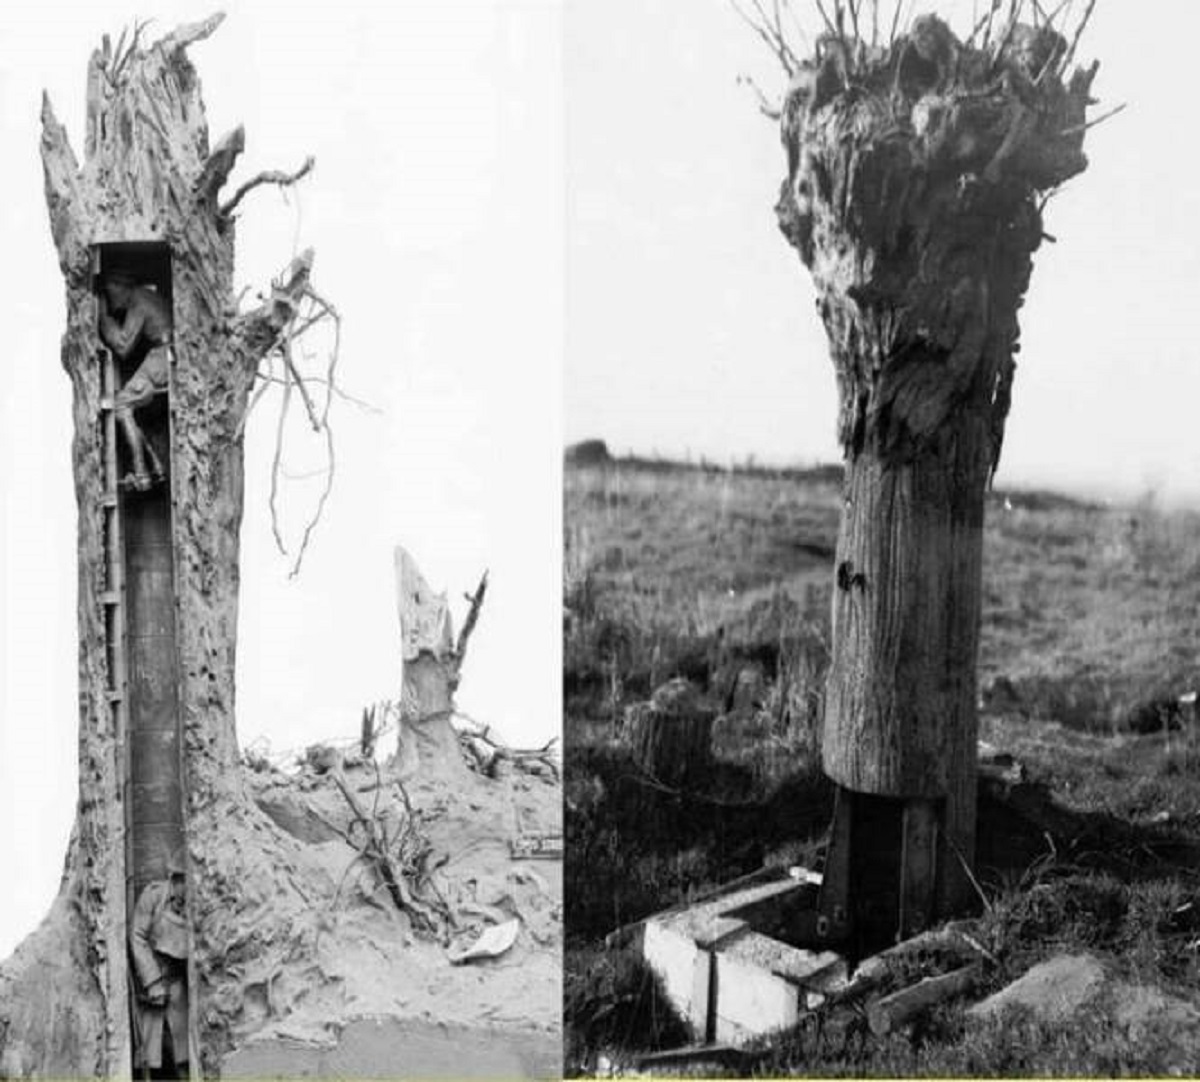 "A Fake Tree Used As An Observation Post And Sniper Nest On The Frontline By The British Army During World War I"